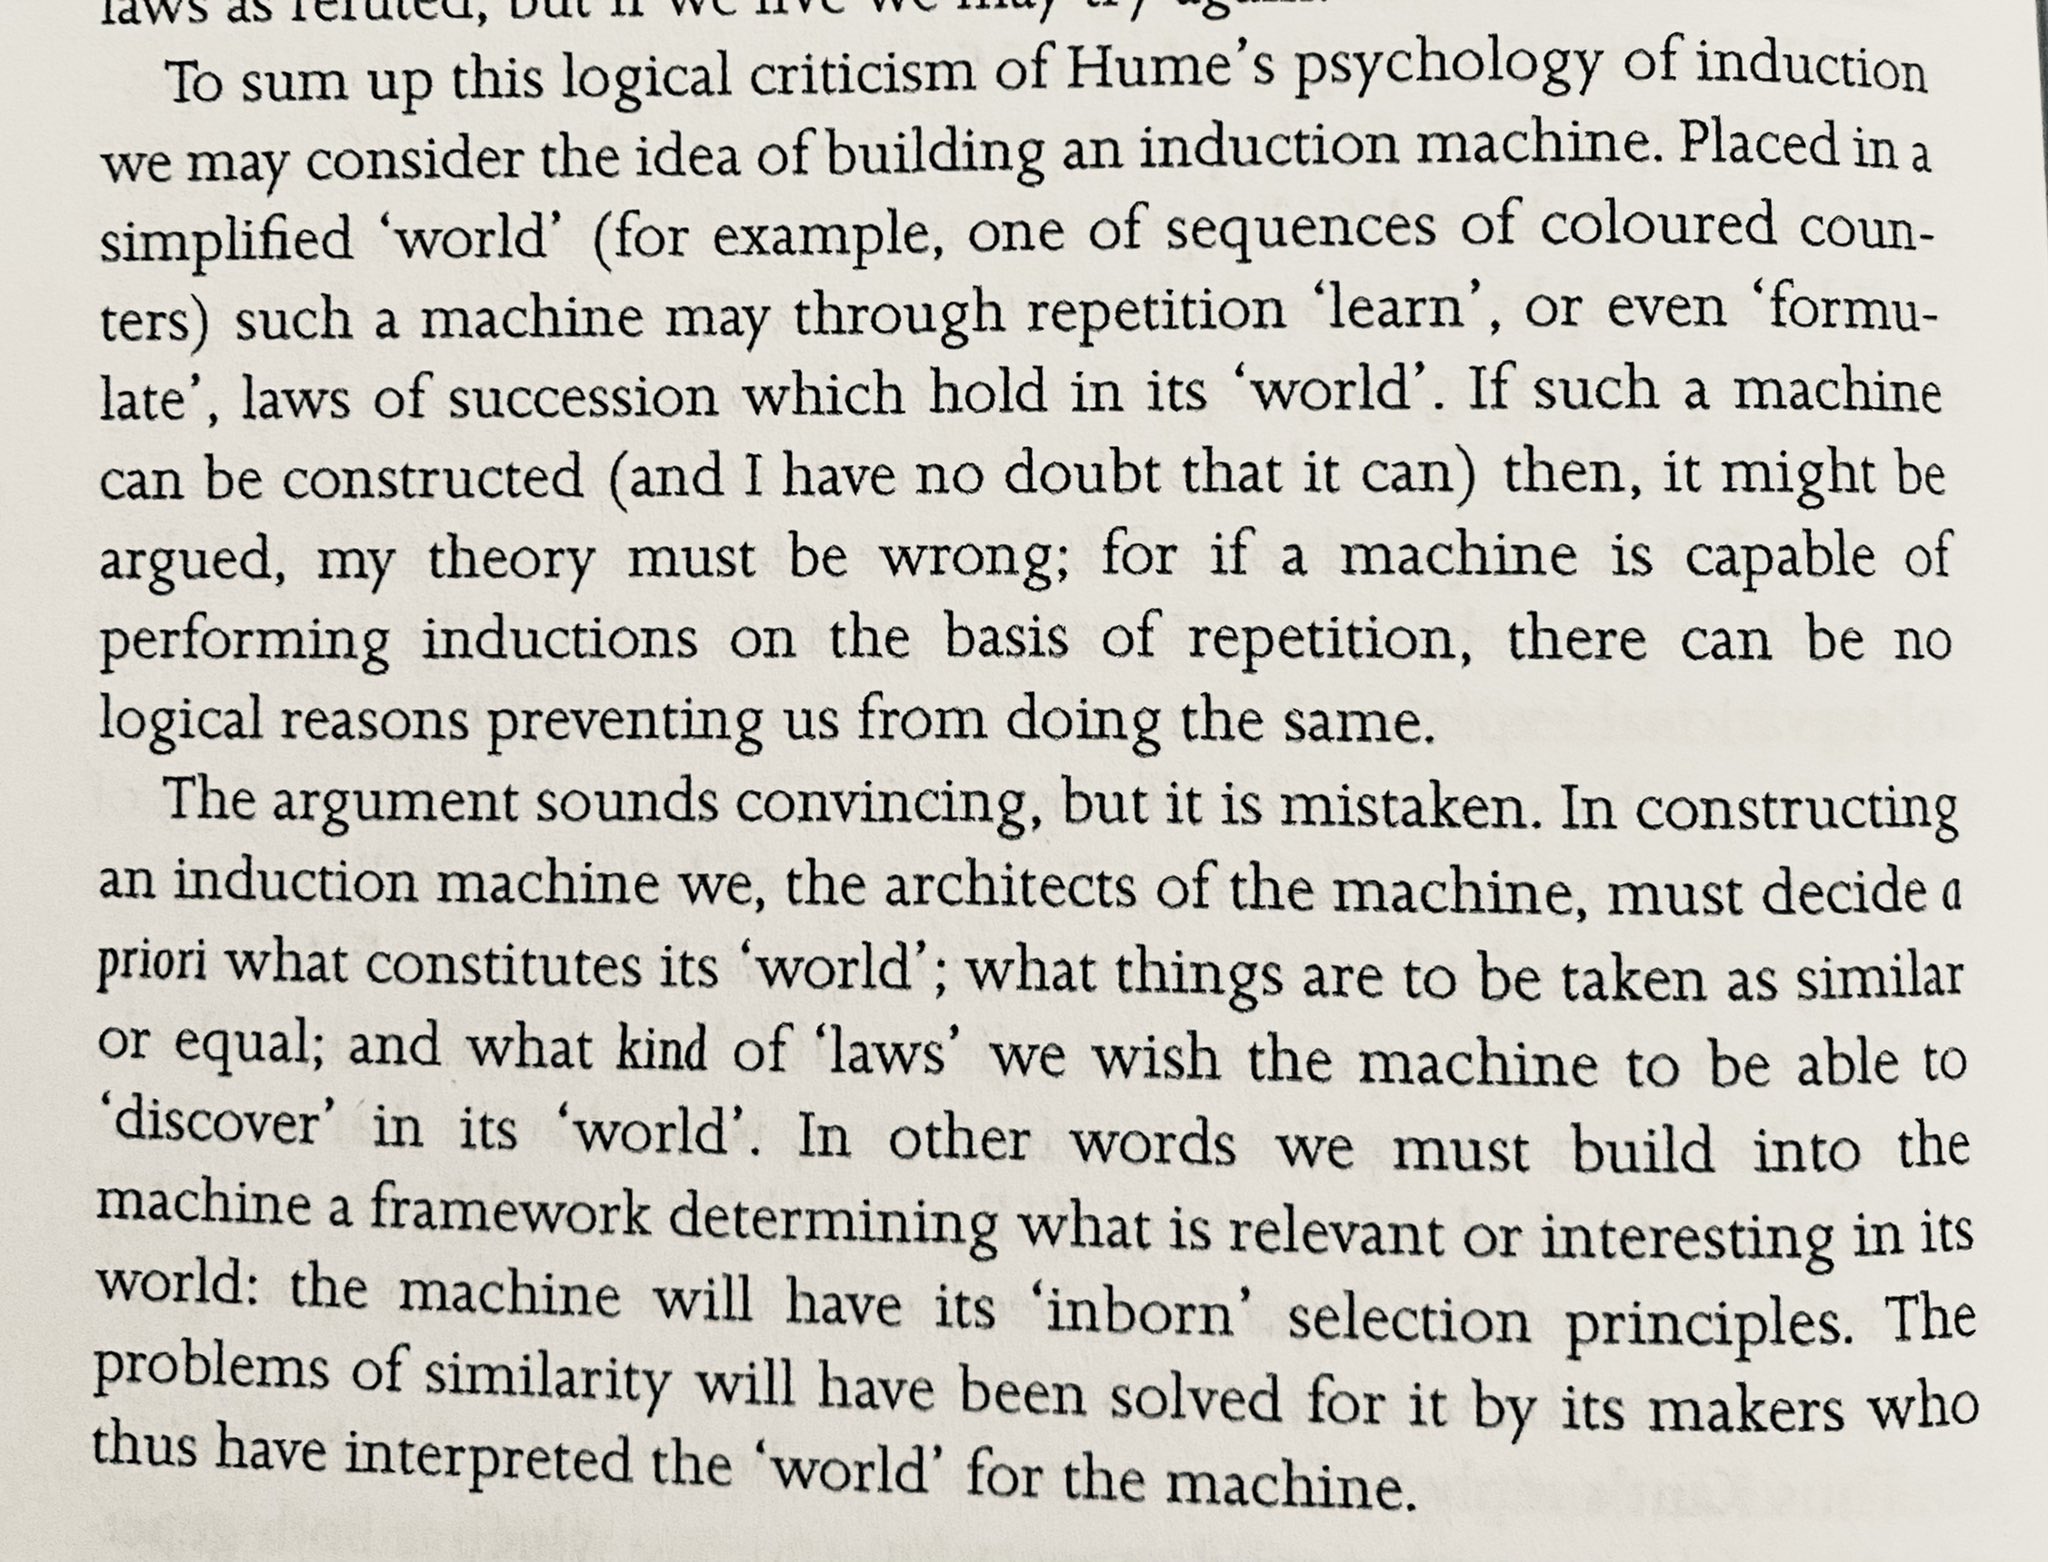 Juan Mateos Garcia on Twitter: "Karl Popper on machine learning and induction, 1963 (from Conjectures Refutations) https://t.co/ViSHRlV7MF" / Twitter